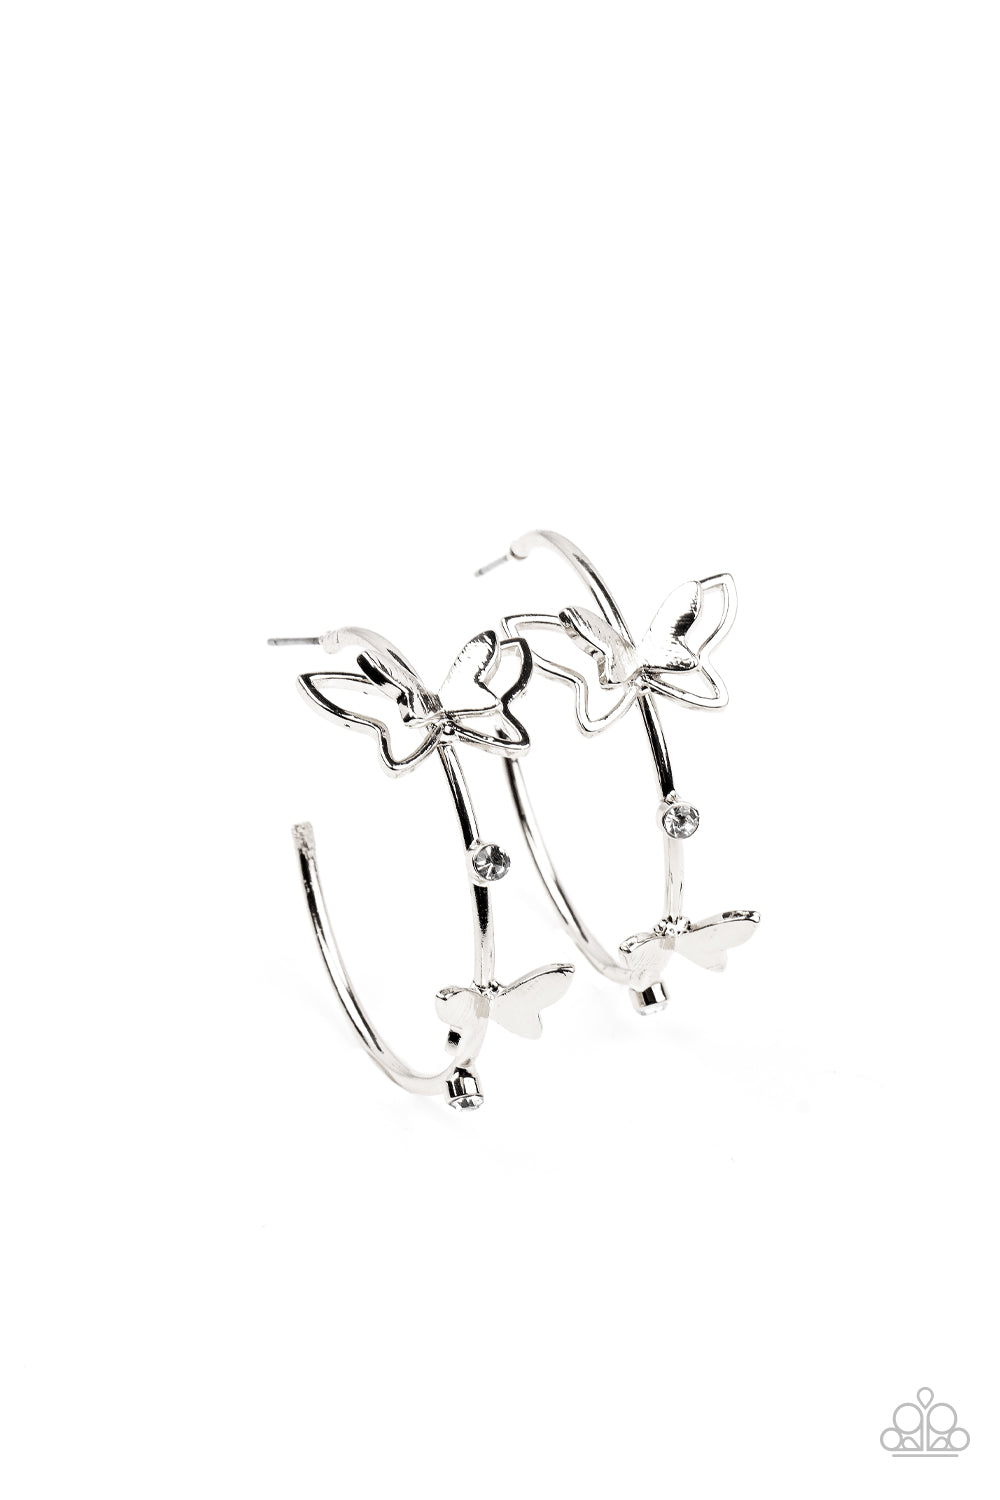 A pair of dainty silver butterflies flutter atop a glistening silver hoop dotted with dainty white rhinestones, creating a whimsical sight. Earring attaches to a standard post fitting. Hoop measures approximately 1 1/2" in diameter.